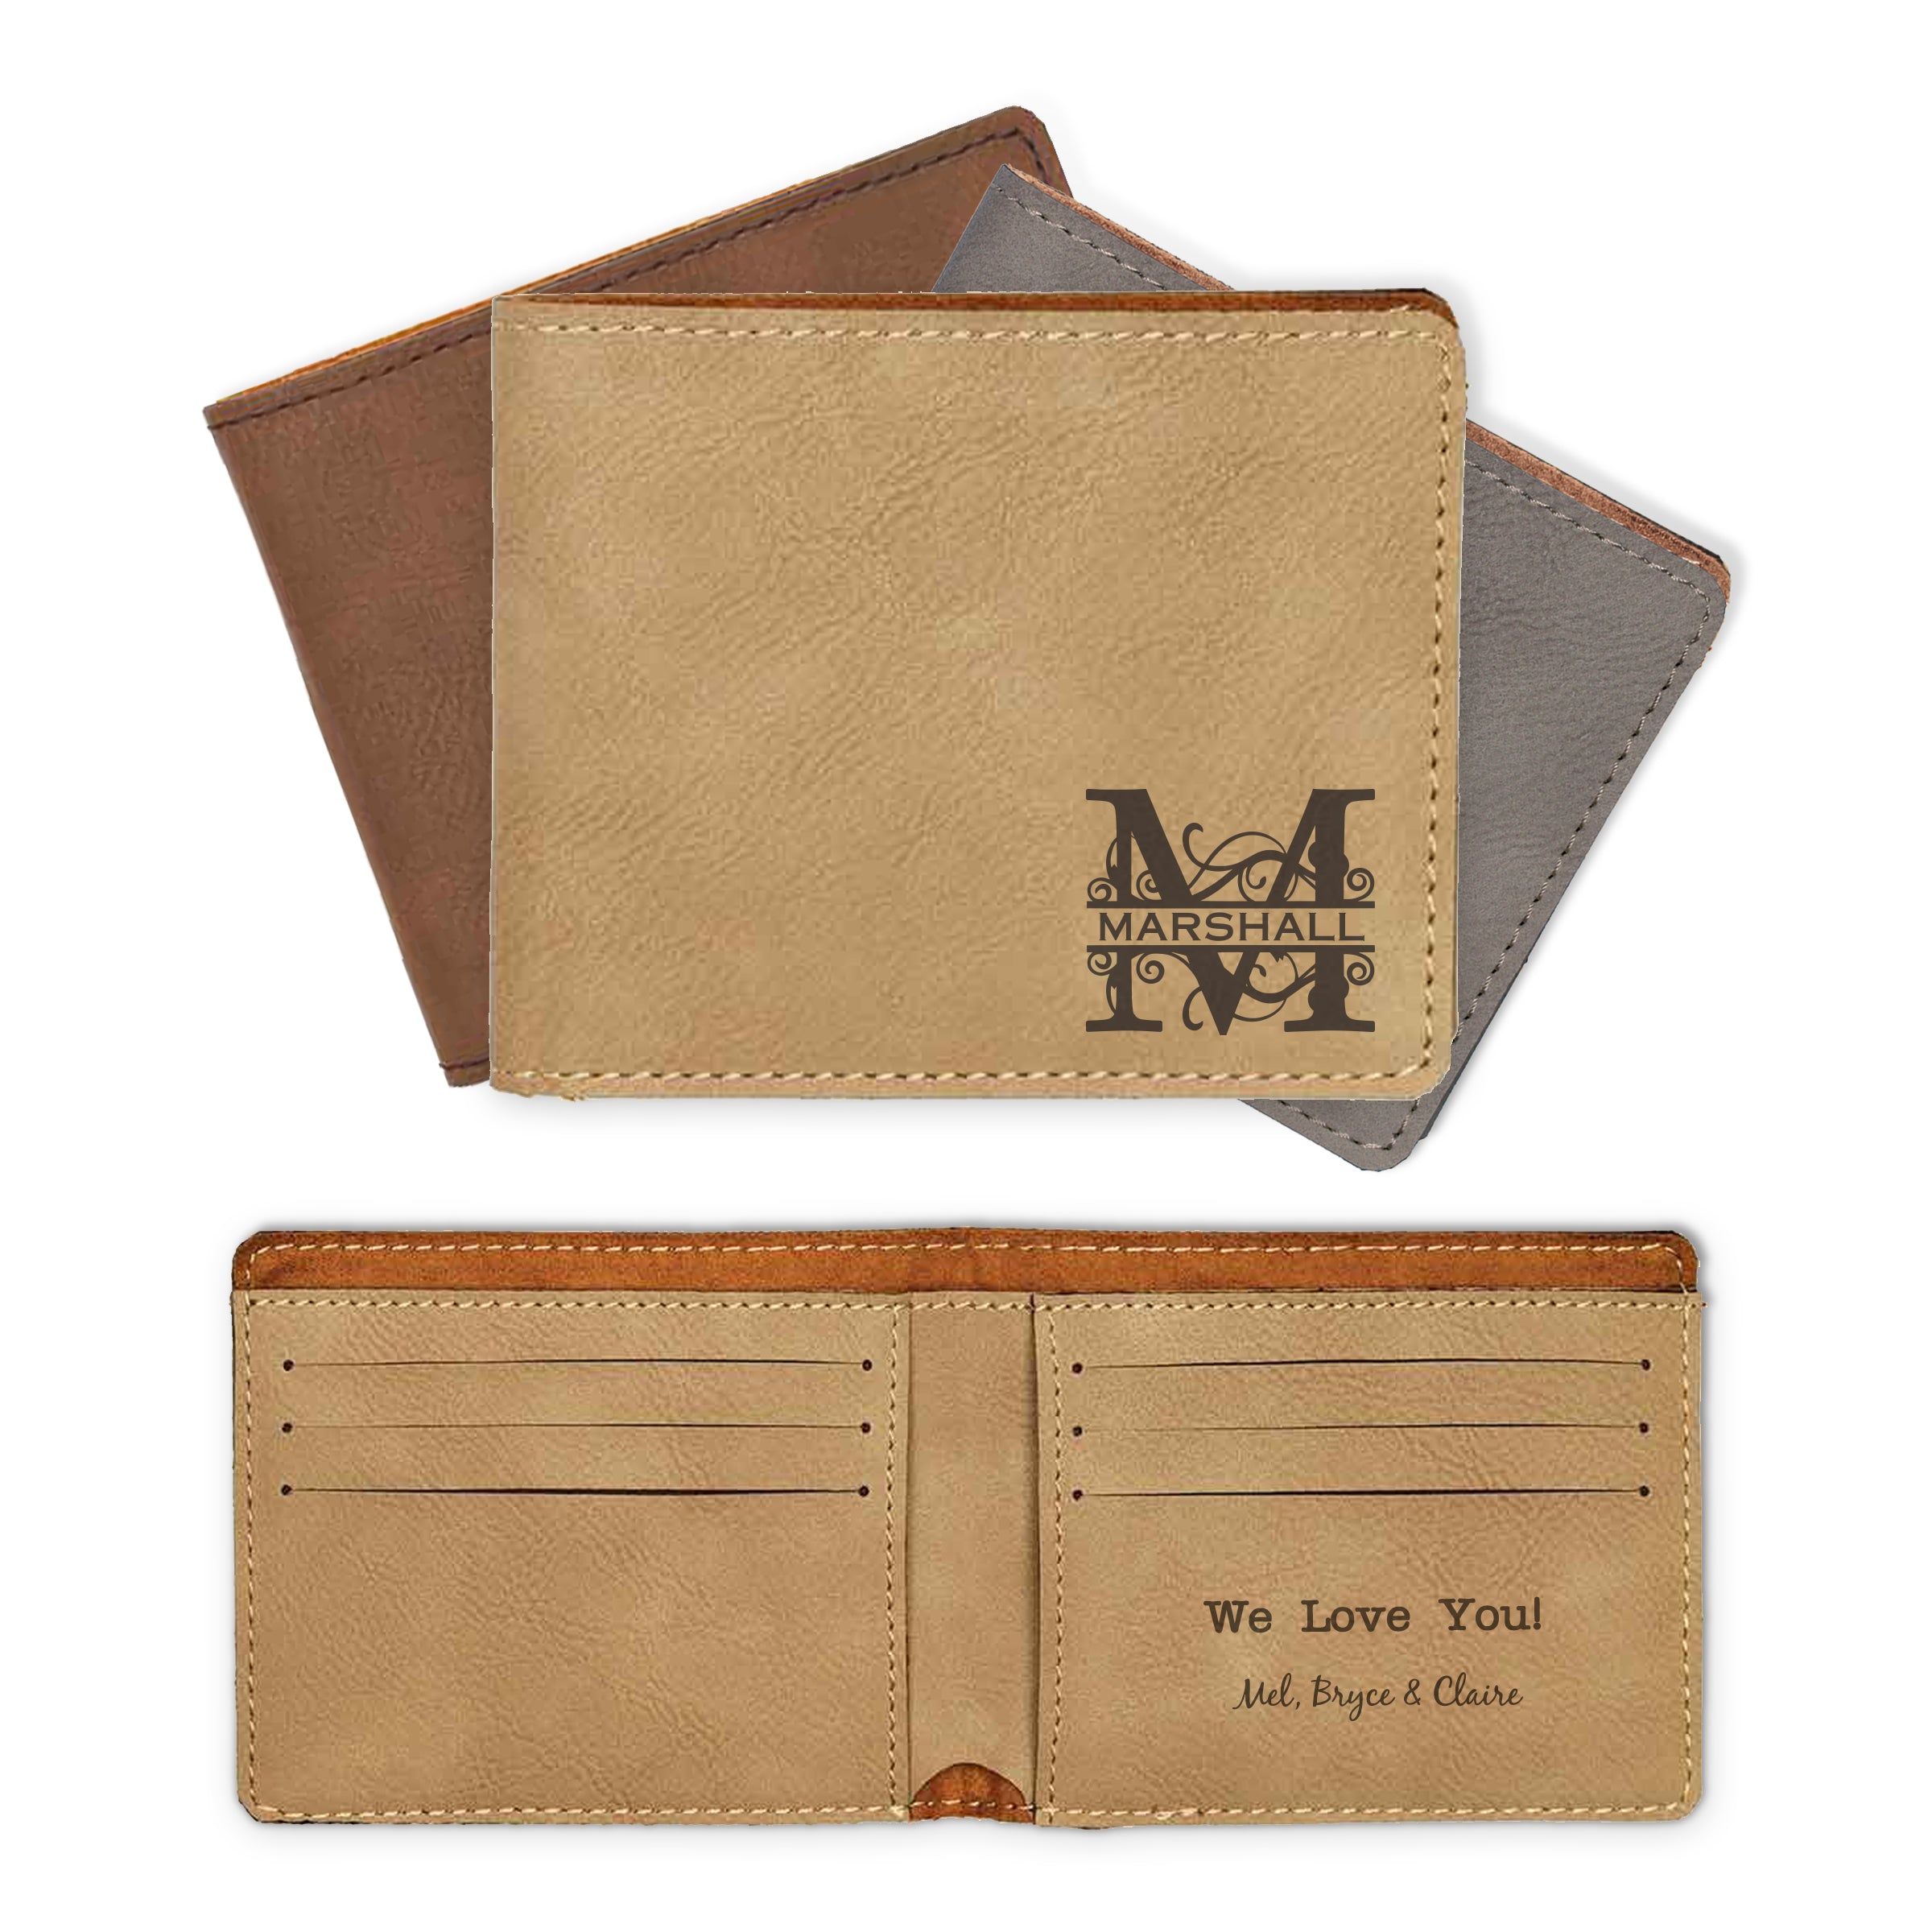 Personalized Monogram Logo Name Printed Genuine Leather Wallet Gift for Man